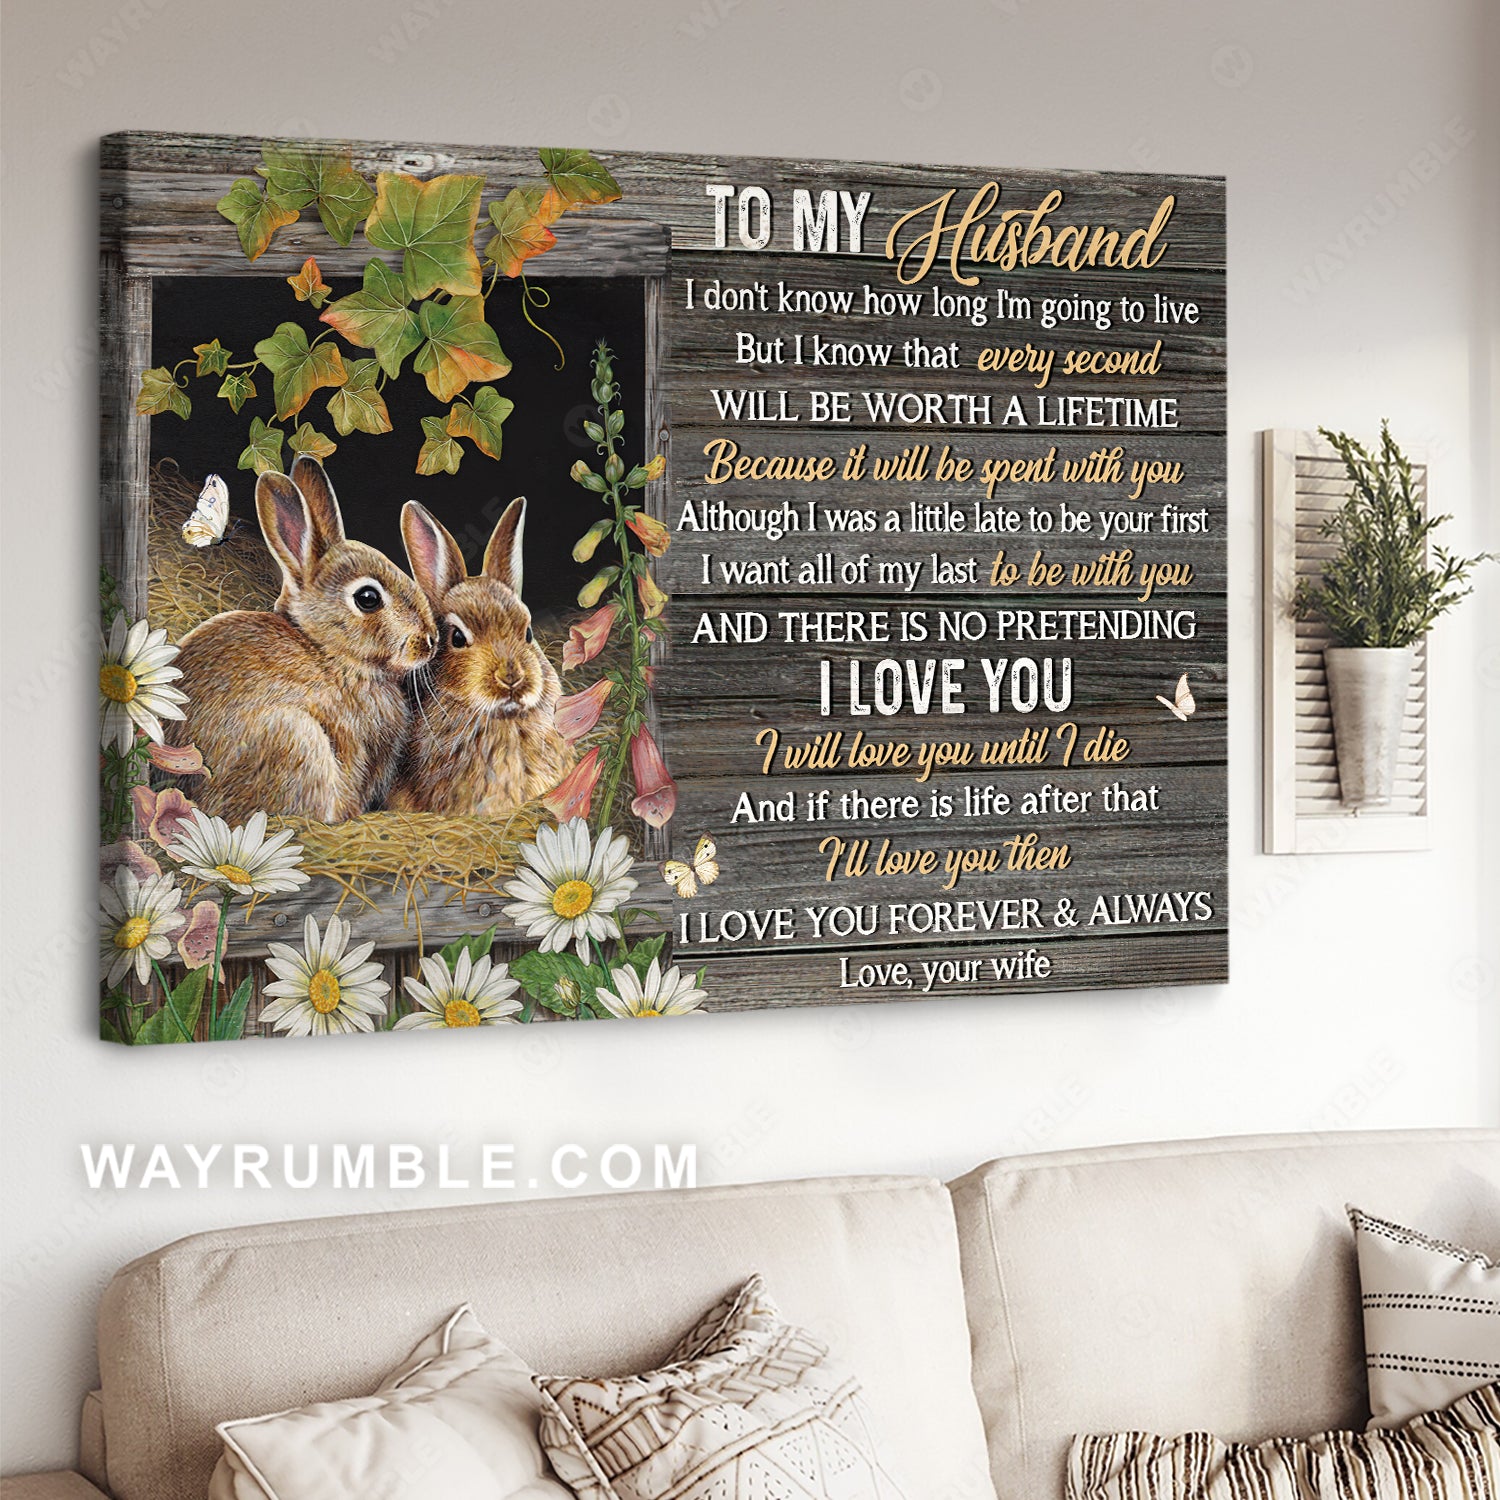 To my husband, Little rabbit, Daisy drawing, I love you forever and always - Family Landscape Canvas Prints, Wall Art